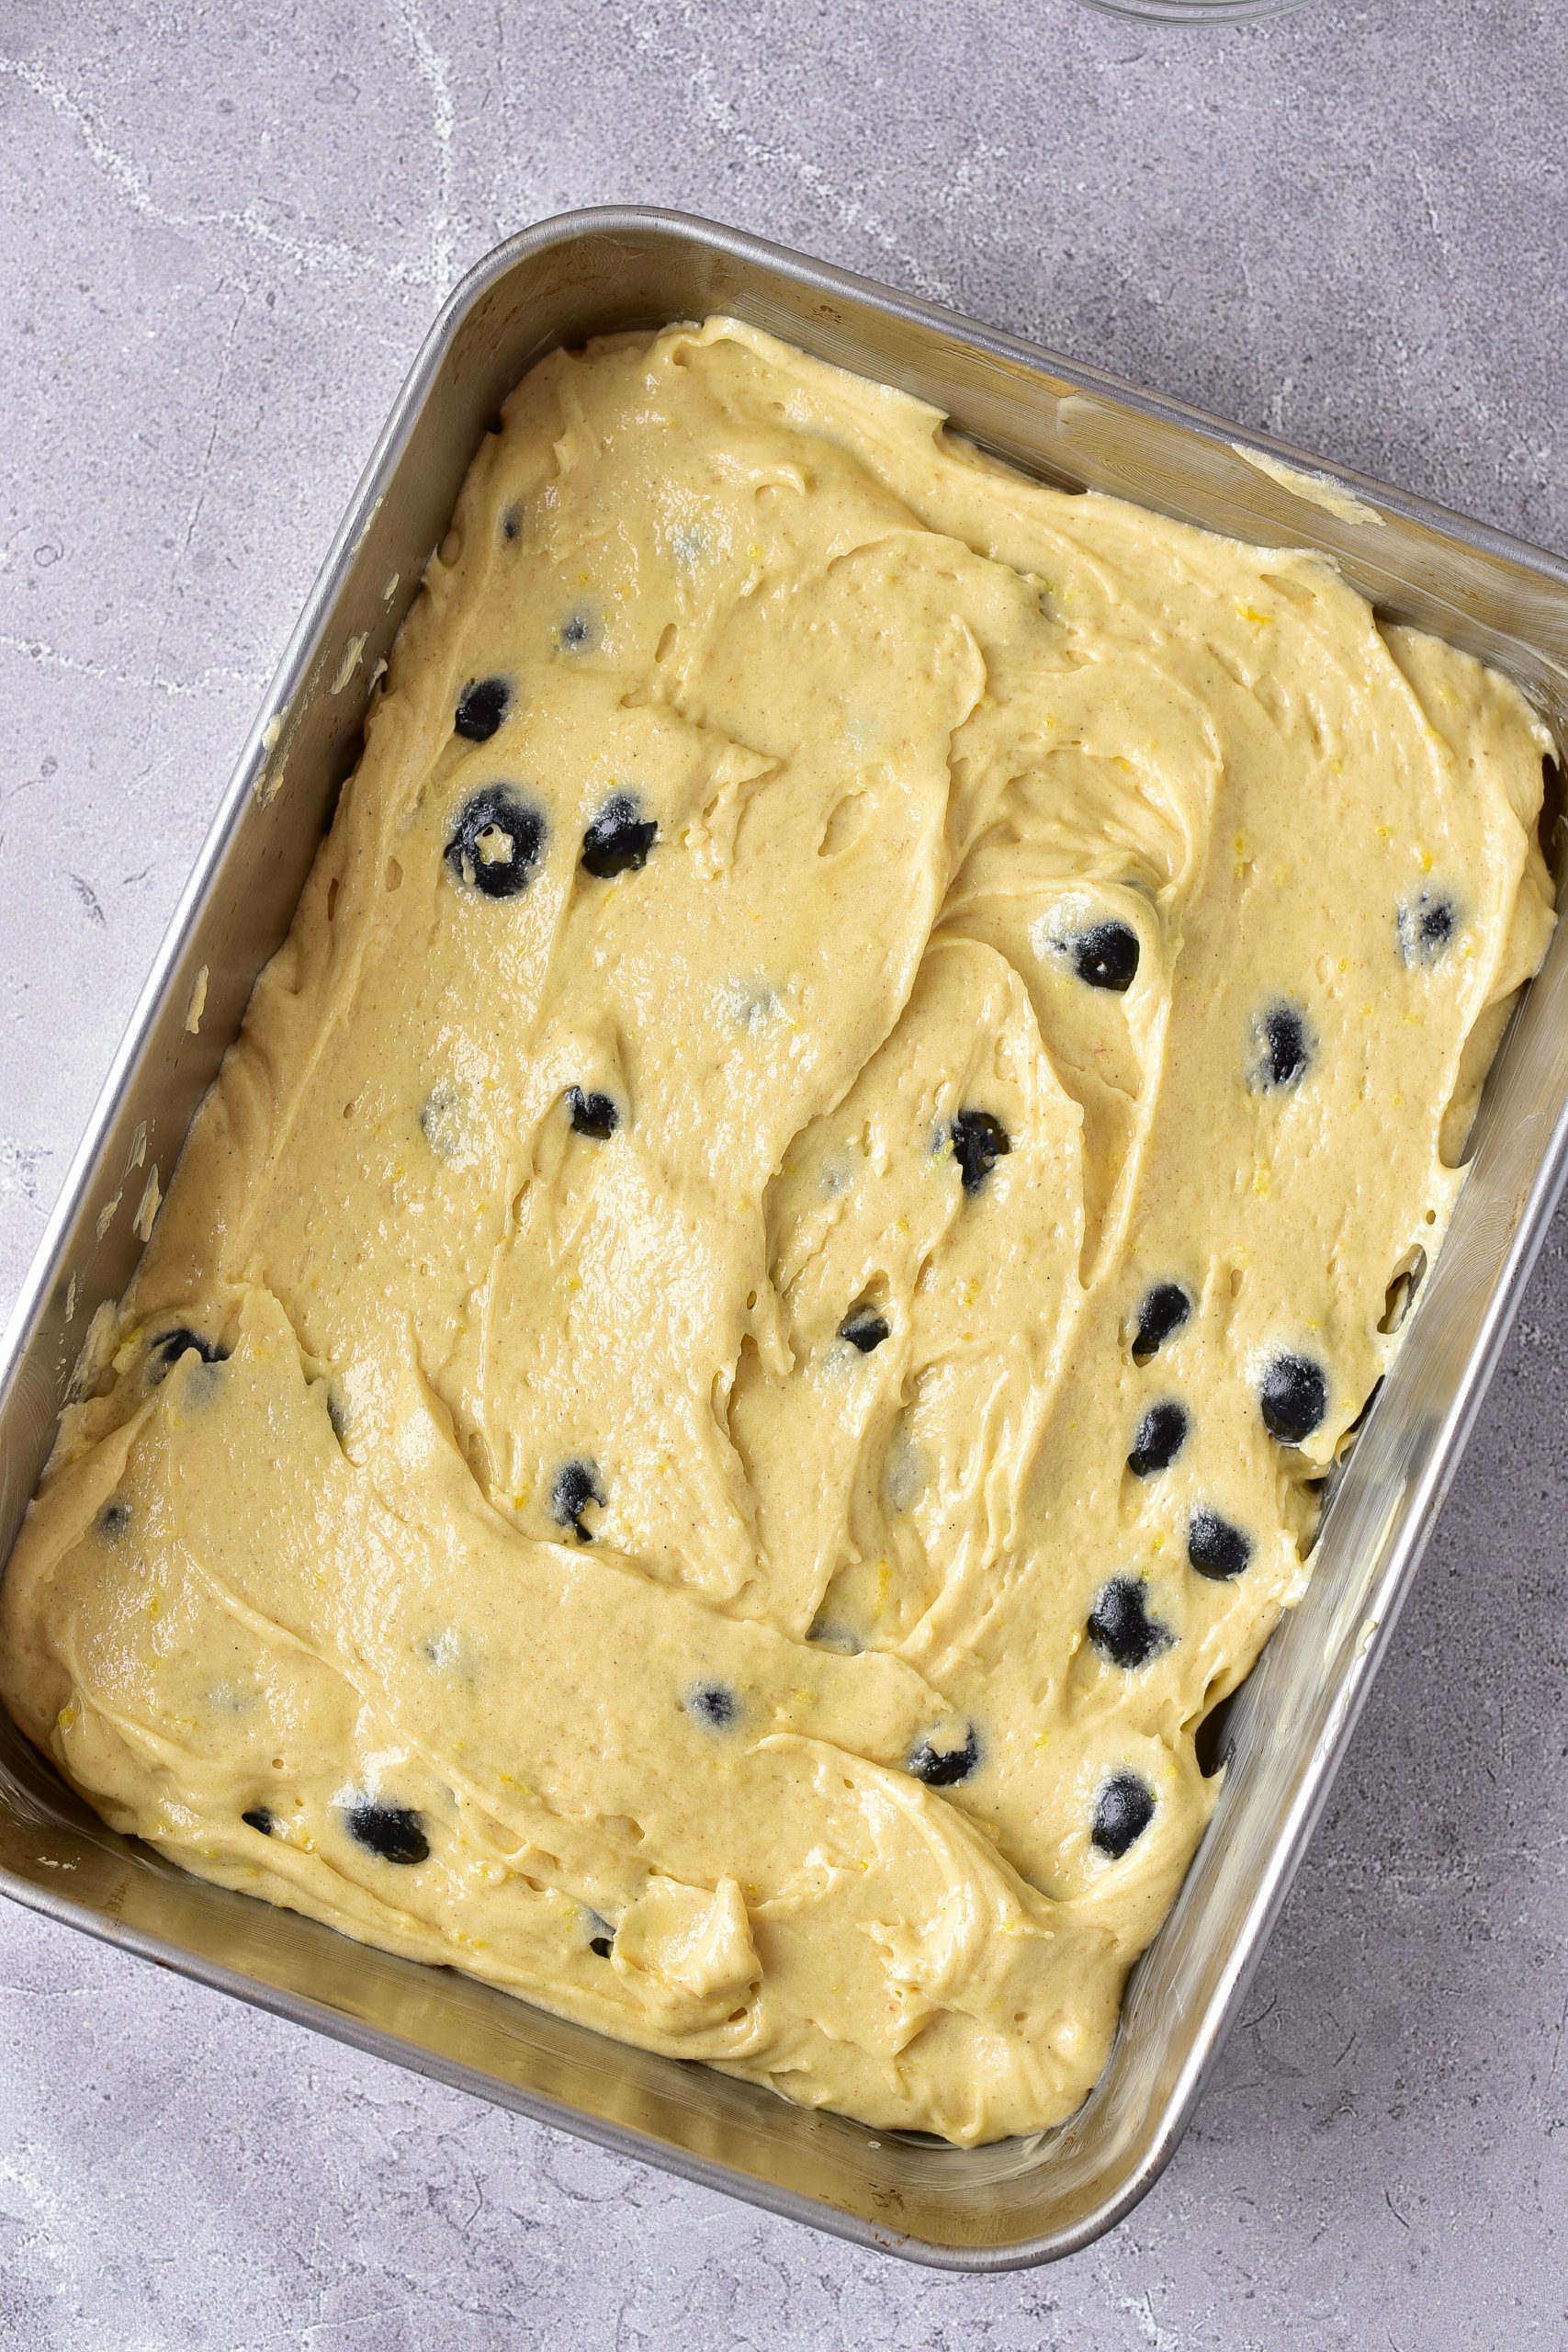 Spread the batter into the baking dish. 